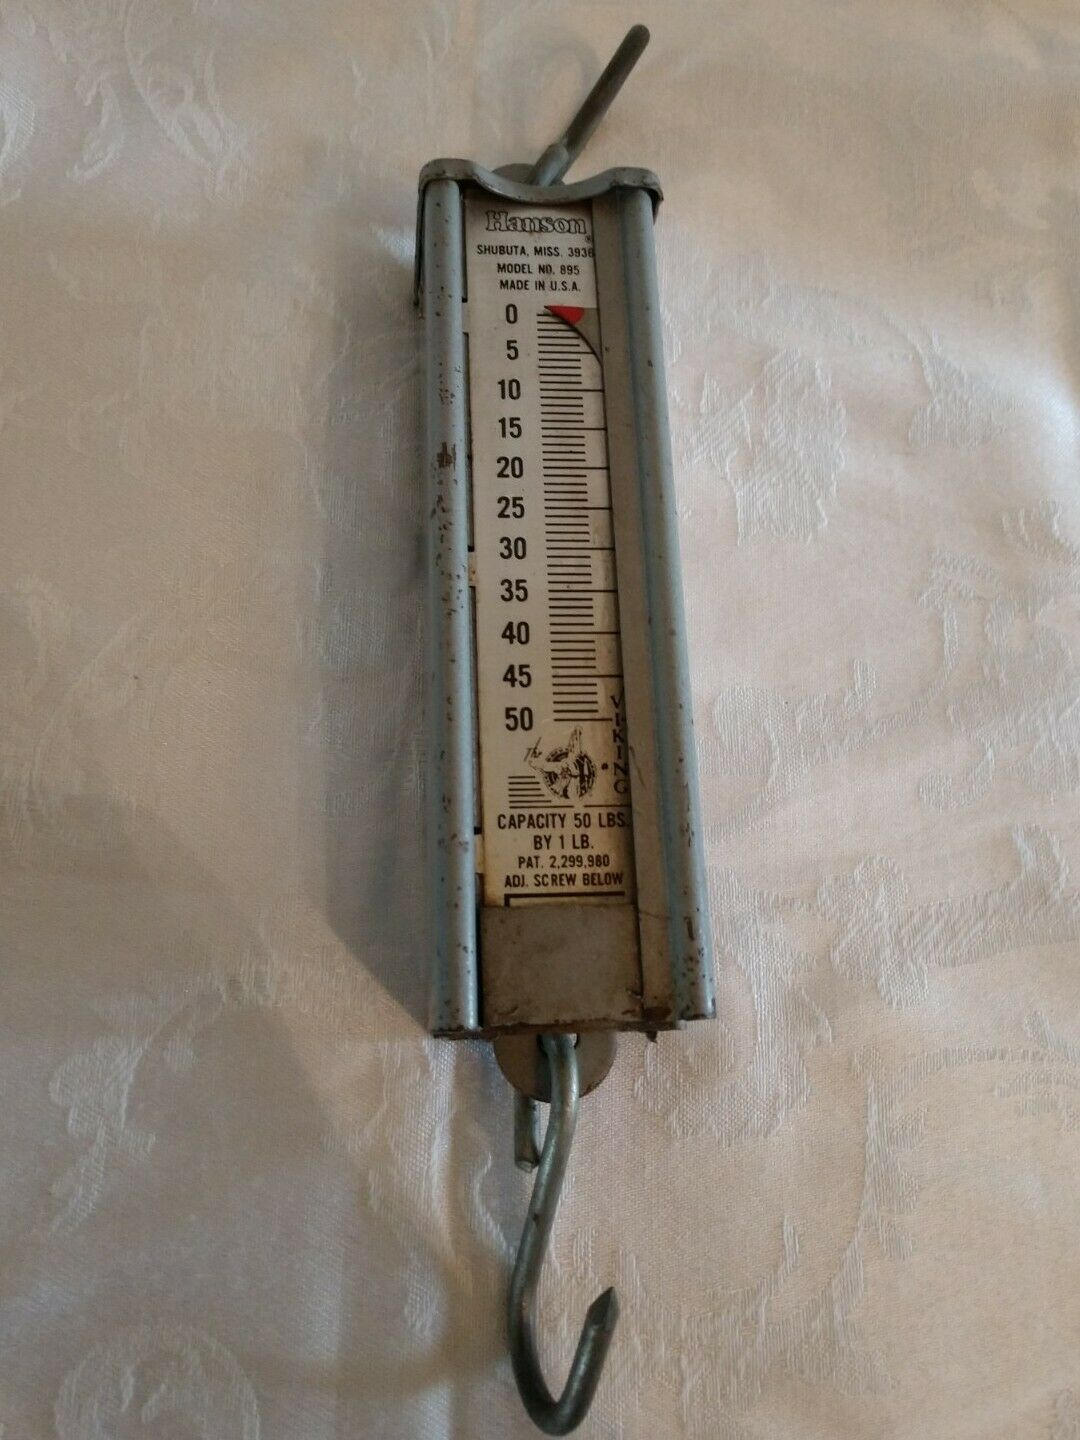 Vintage Hanson Hanging Scale Model 895 Capacity 50 Lbs Made In U.s.a.